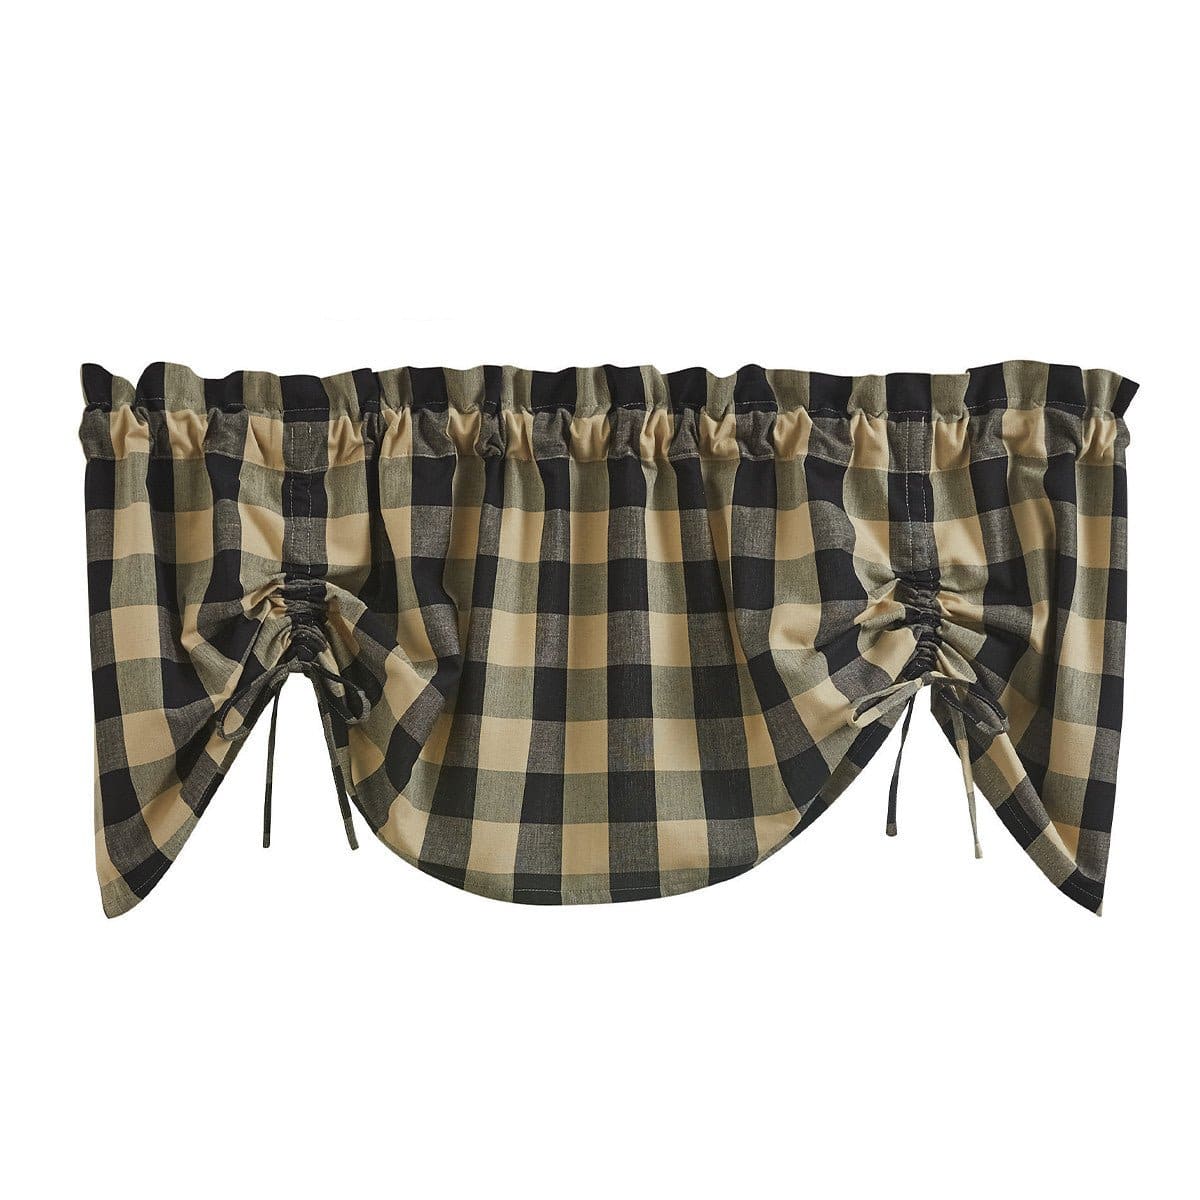 Wicklow Check in Black Tie Up Farmhouse Valance Lined-Park Designs-The Village Merchant